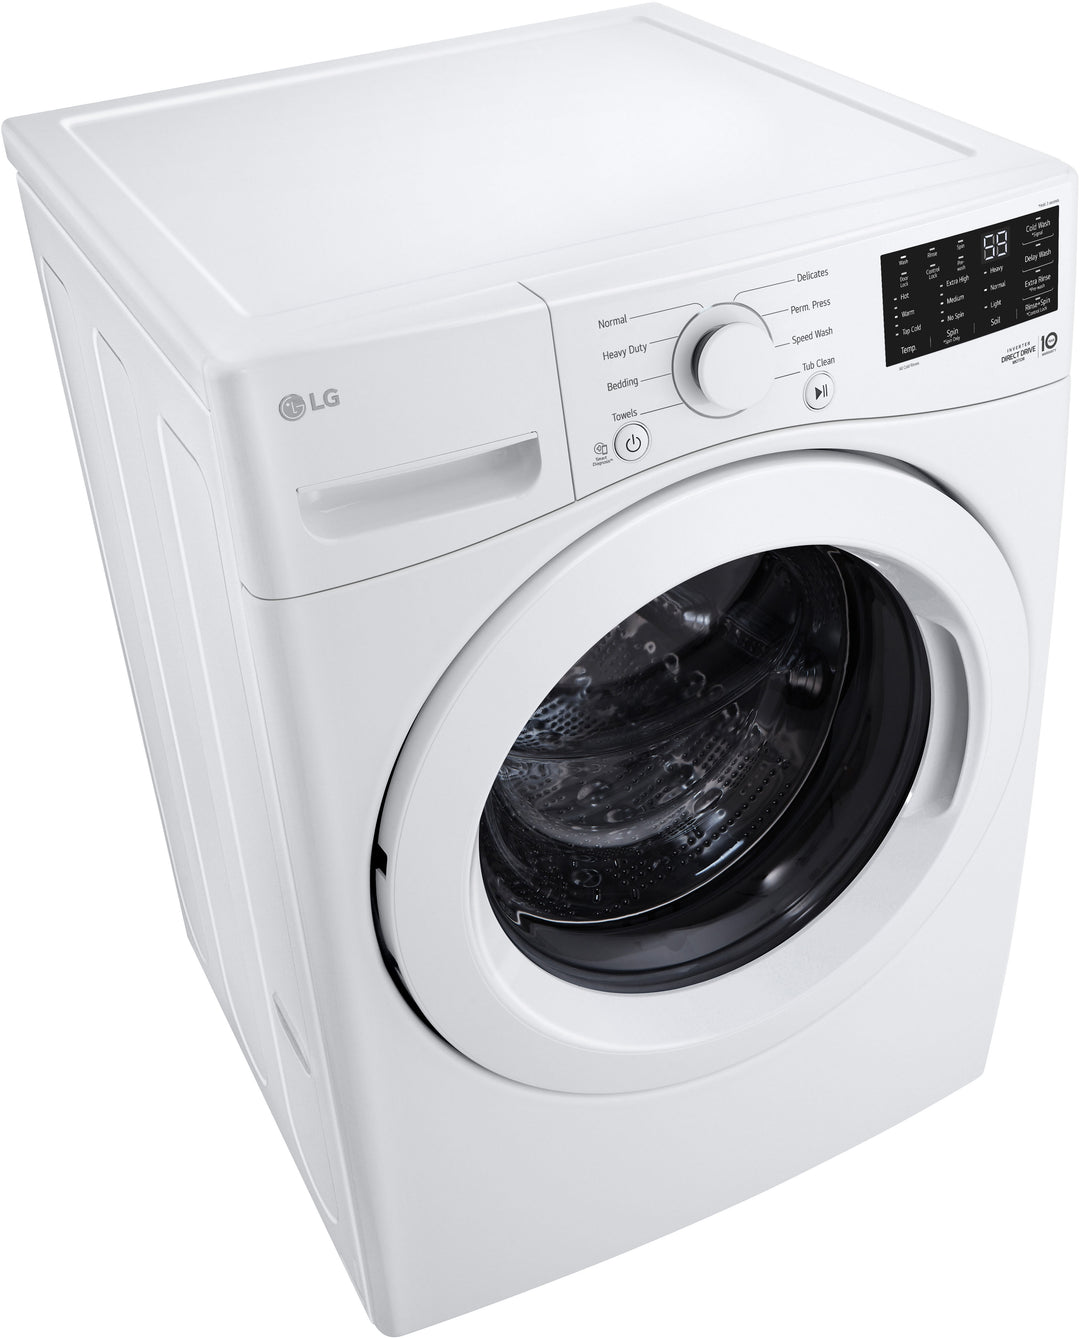 LG - 5.0 Cu. Ft. High-Efficiency Smart Front Load Washer with 6Motion Technology - White_8